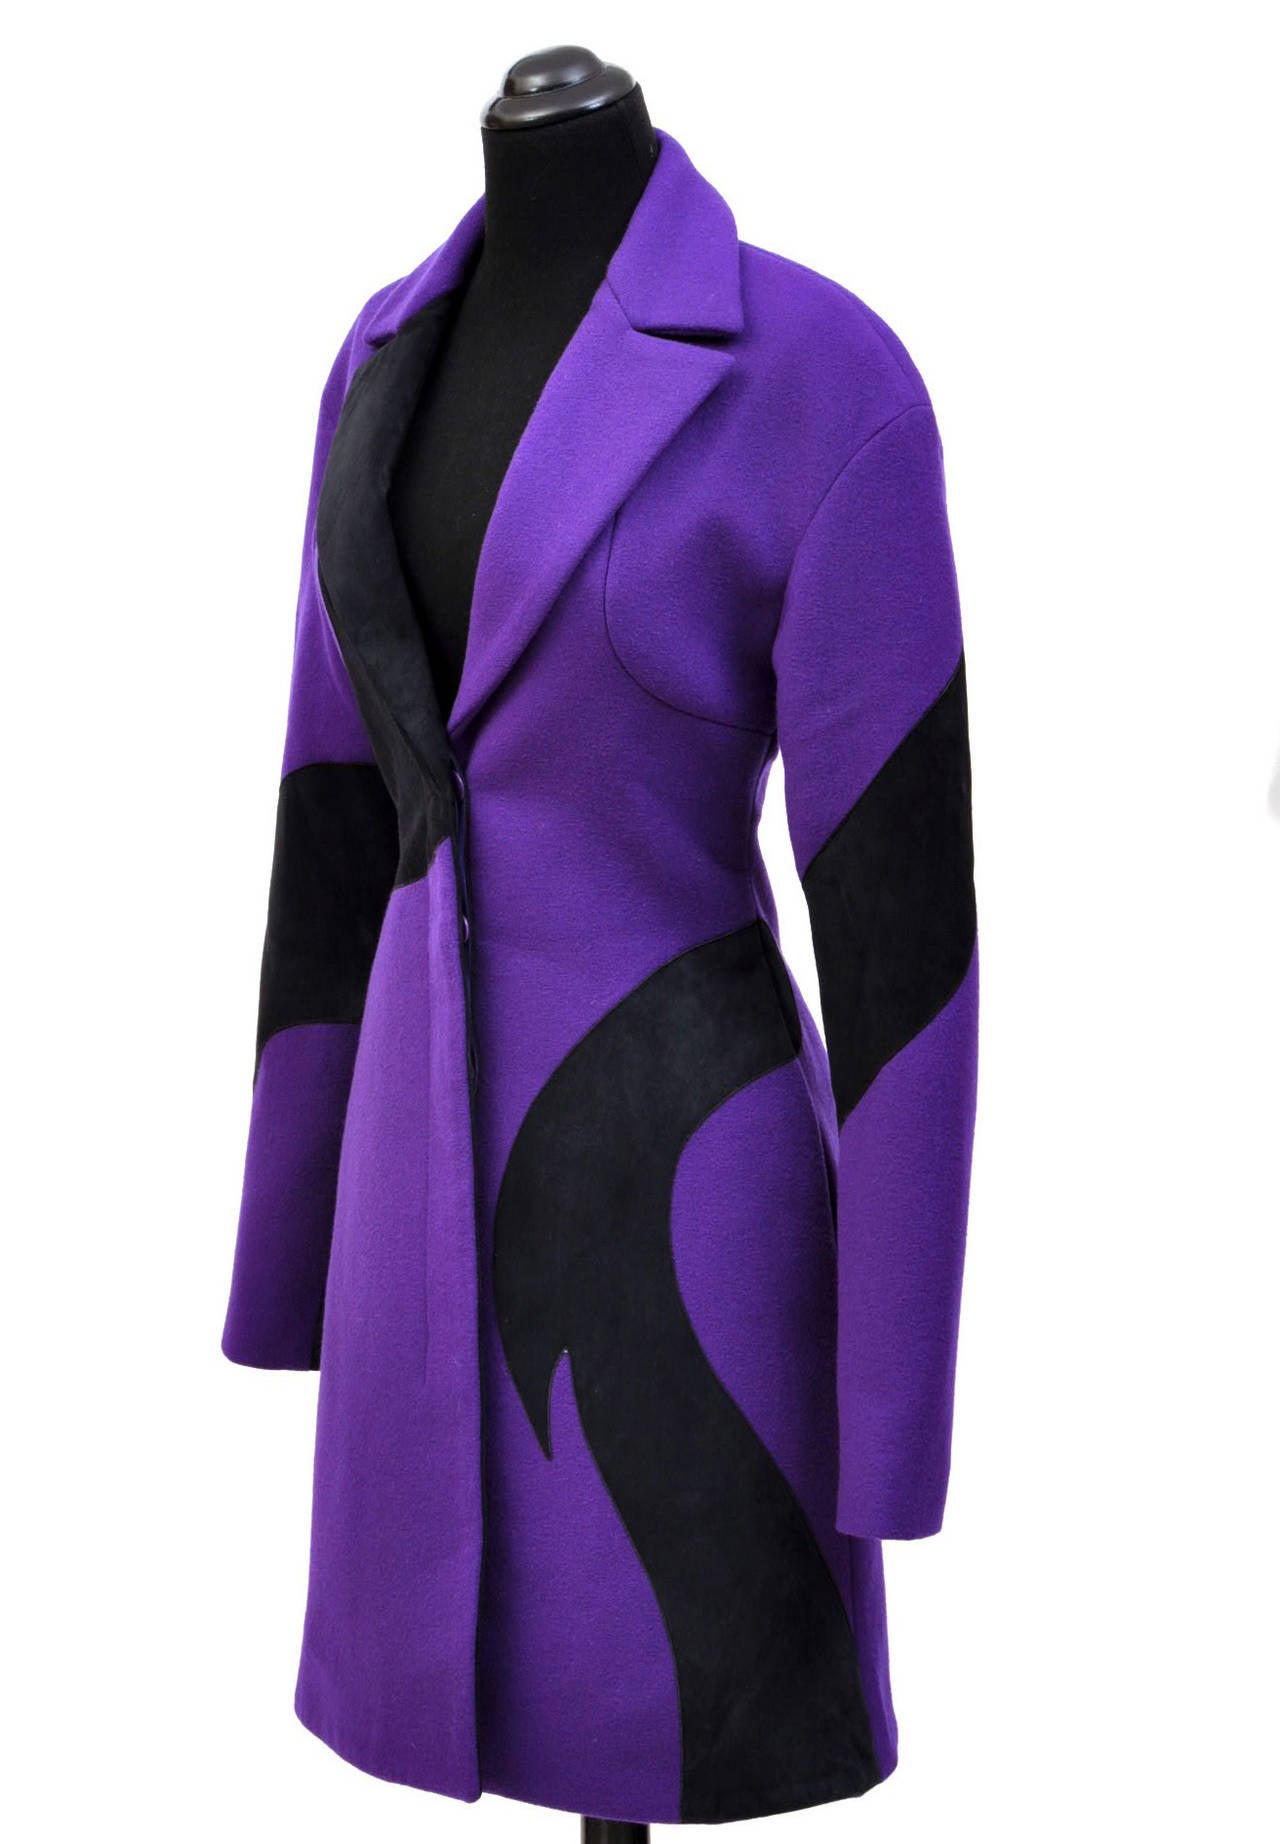 F/W 2011 look #20 NEW VERSACE VIOLET WOOL COAT with SUEDE 38 - 4 For Sale 1